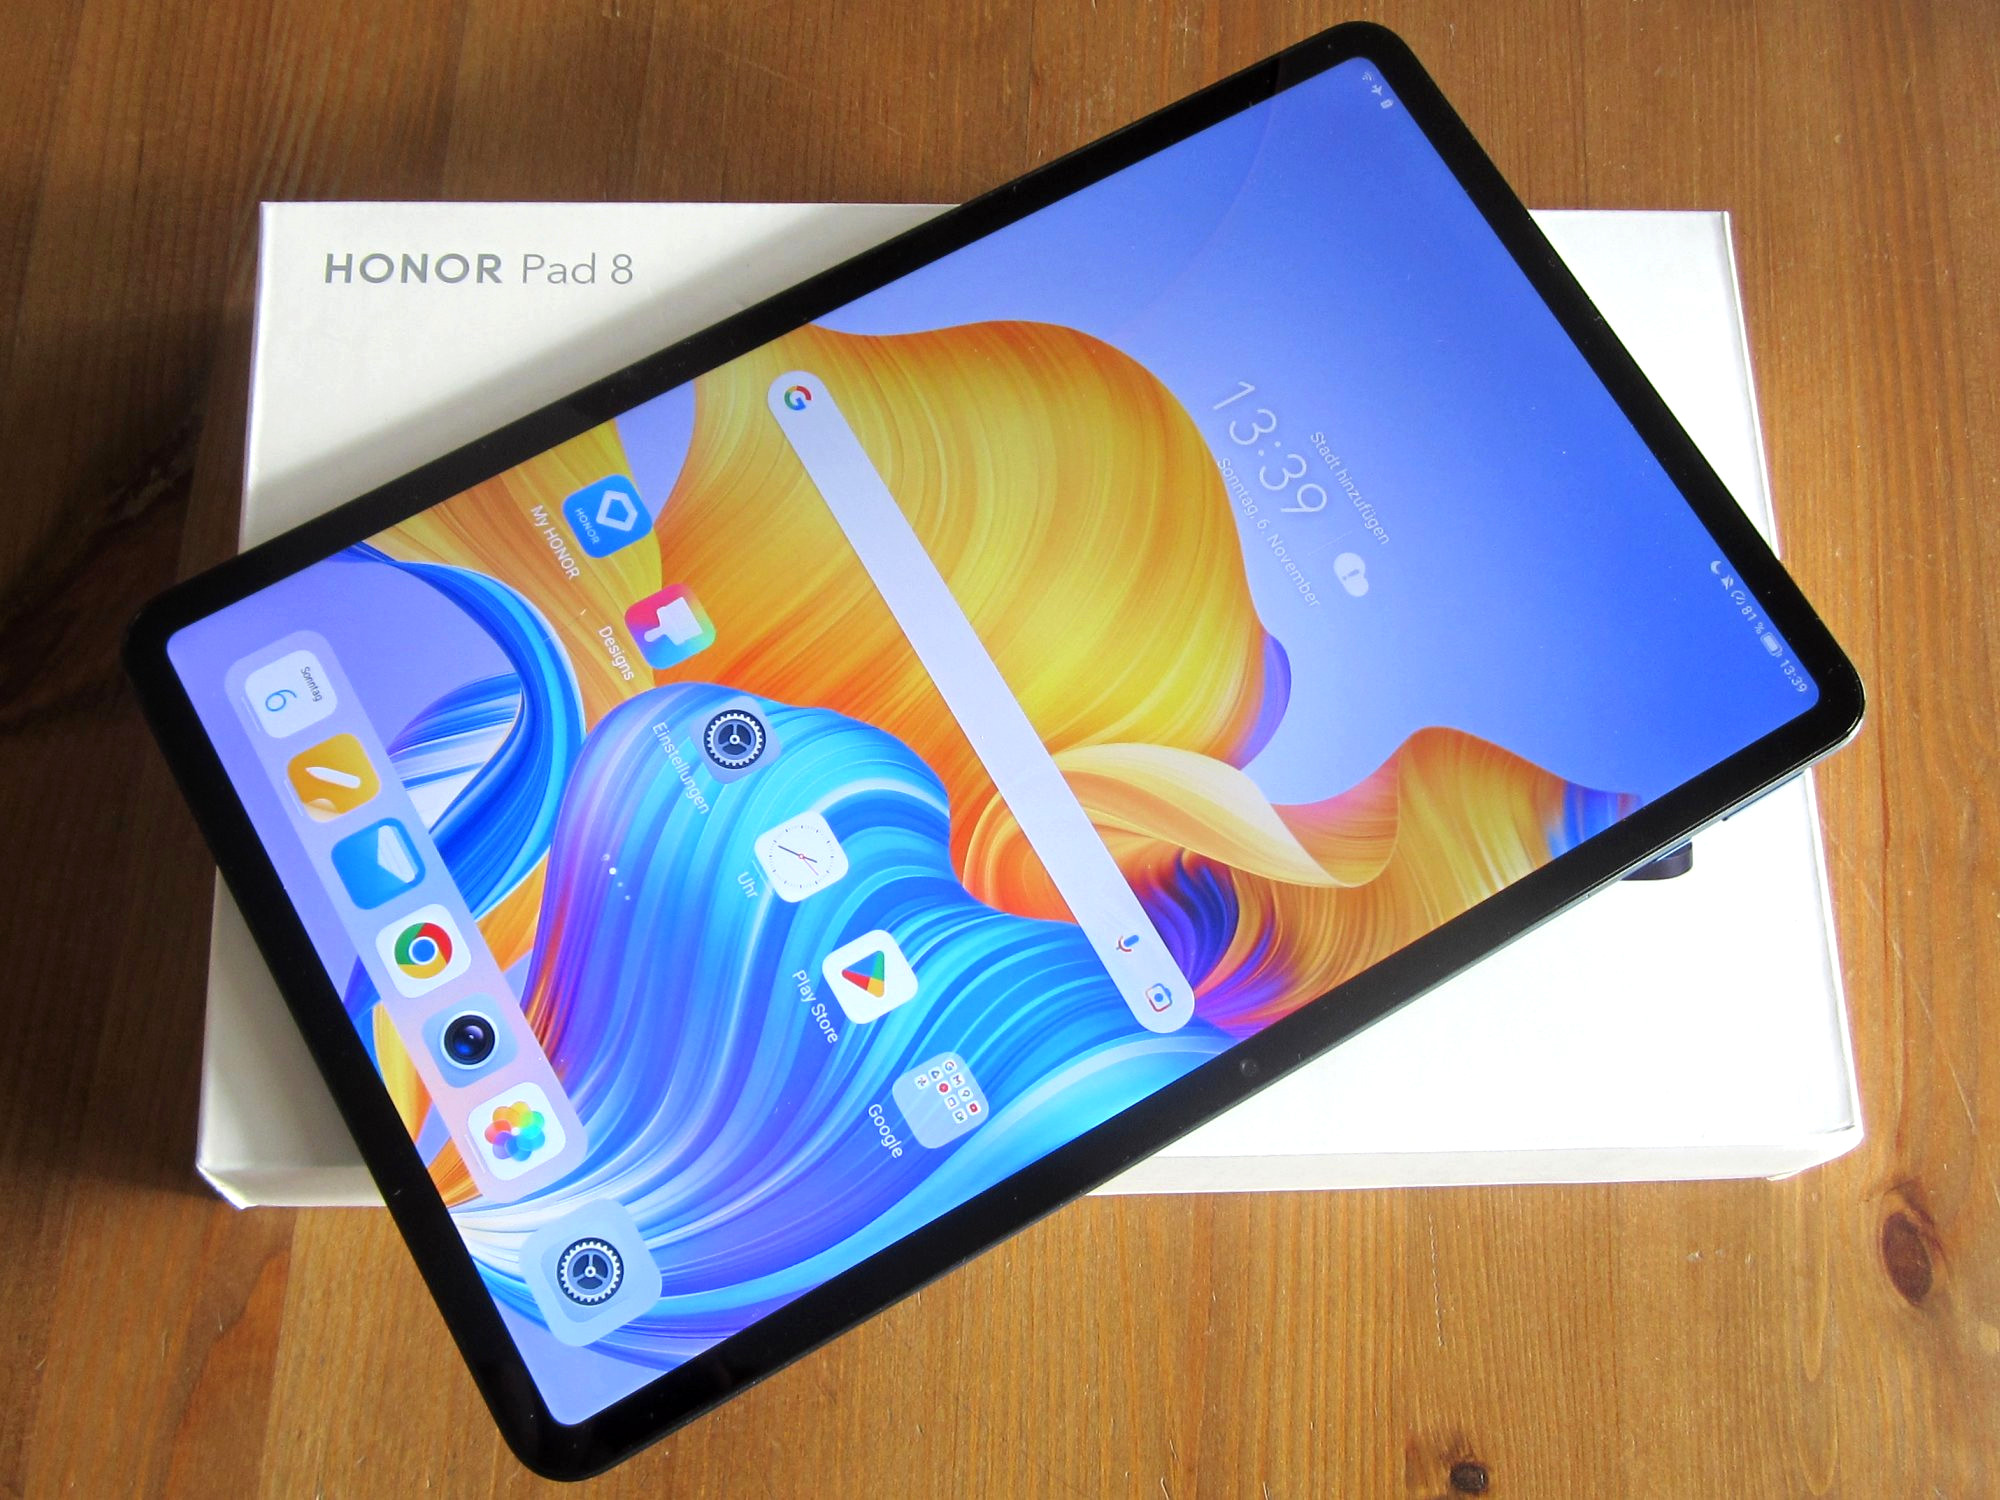 Honor Pad 8: Affordable mid-range tablet with 12-inch display and